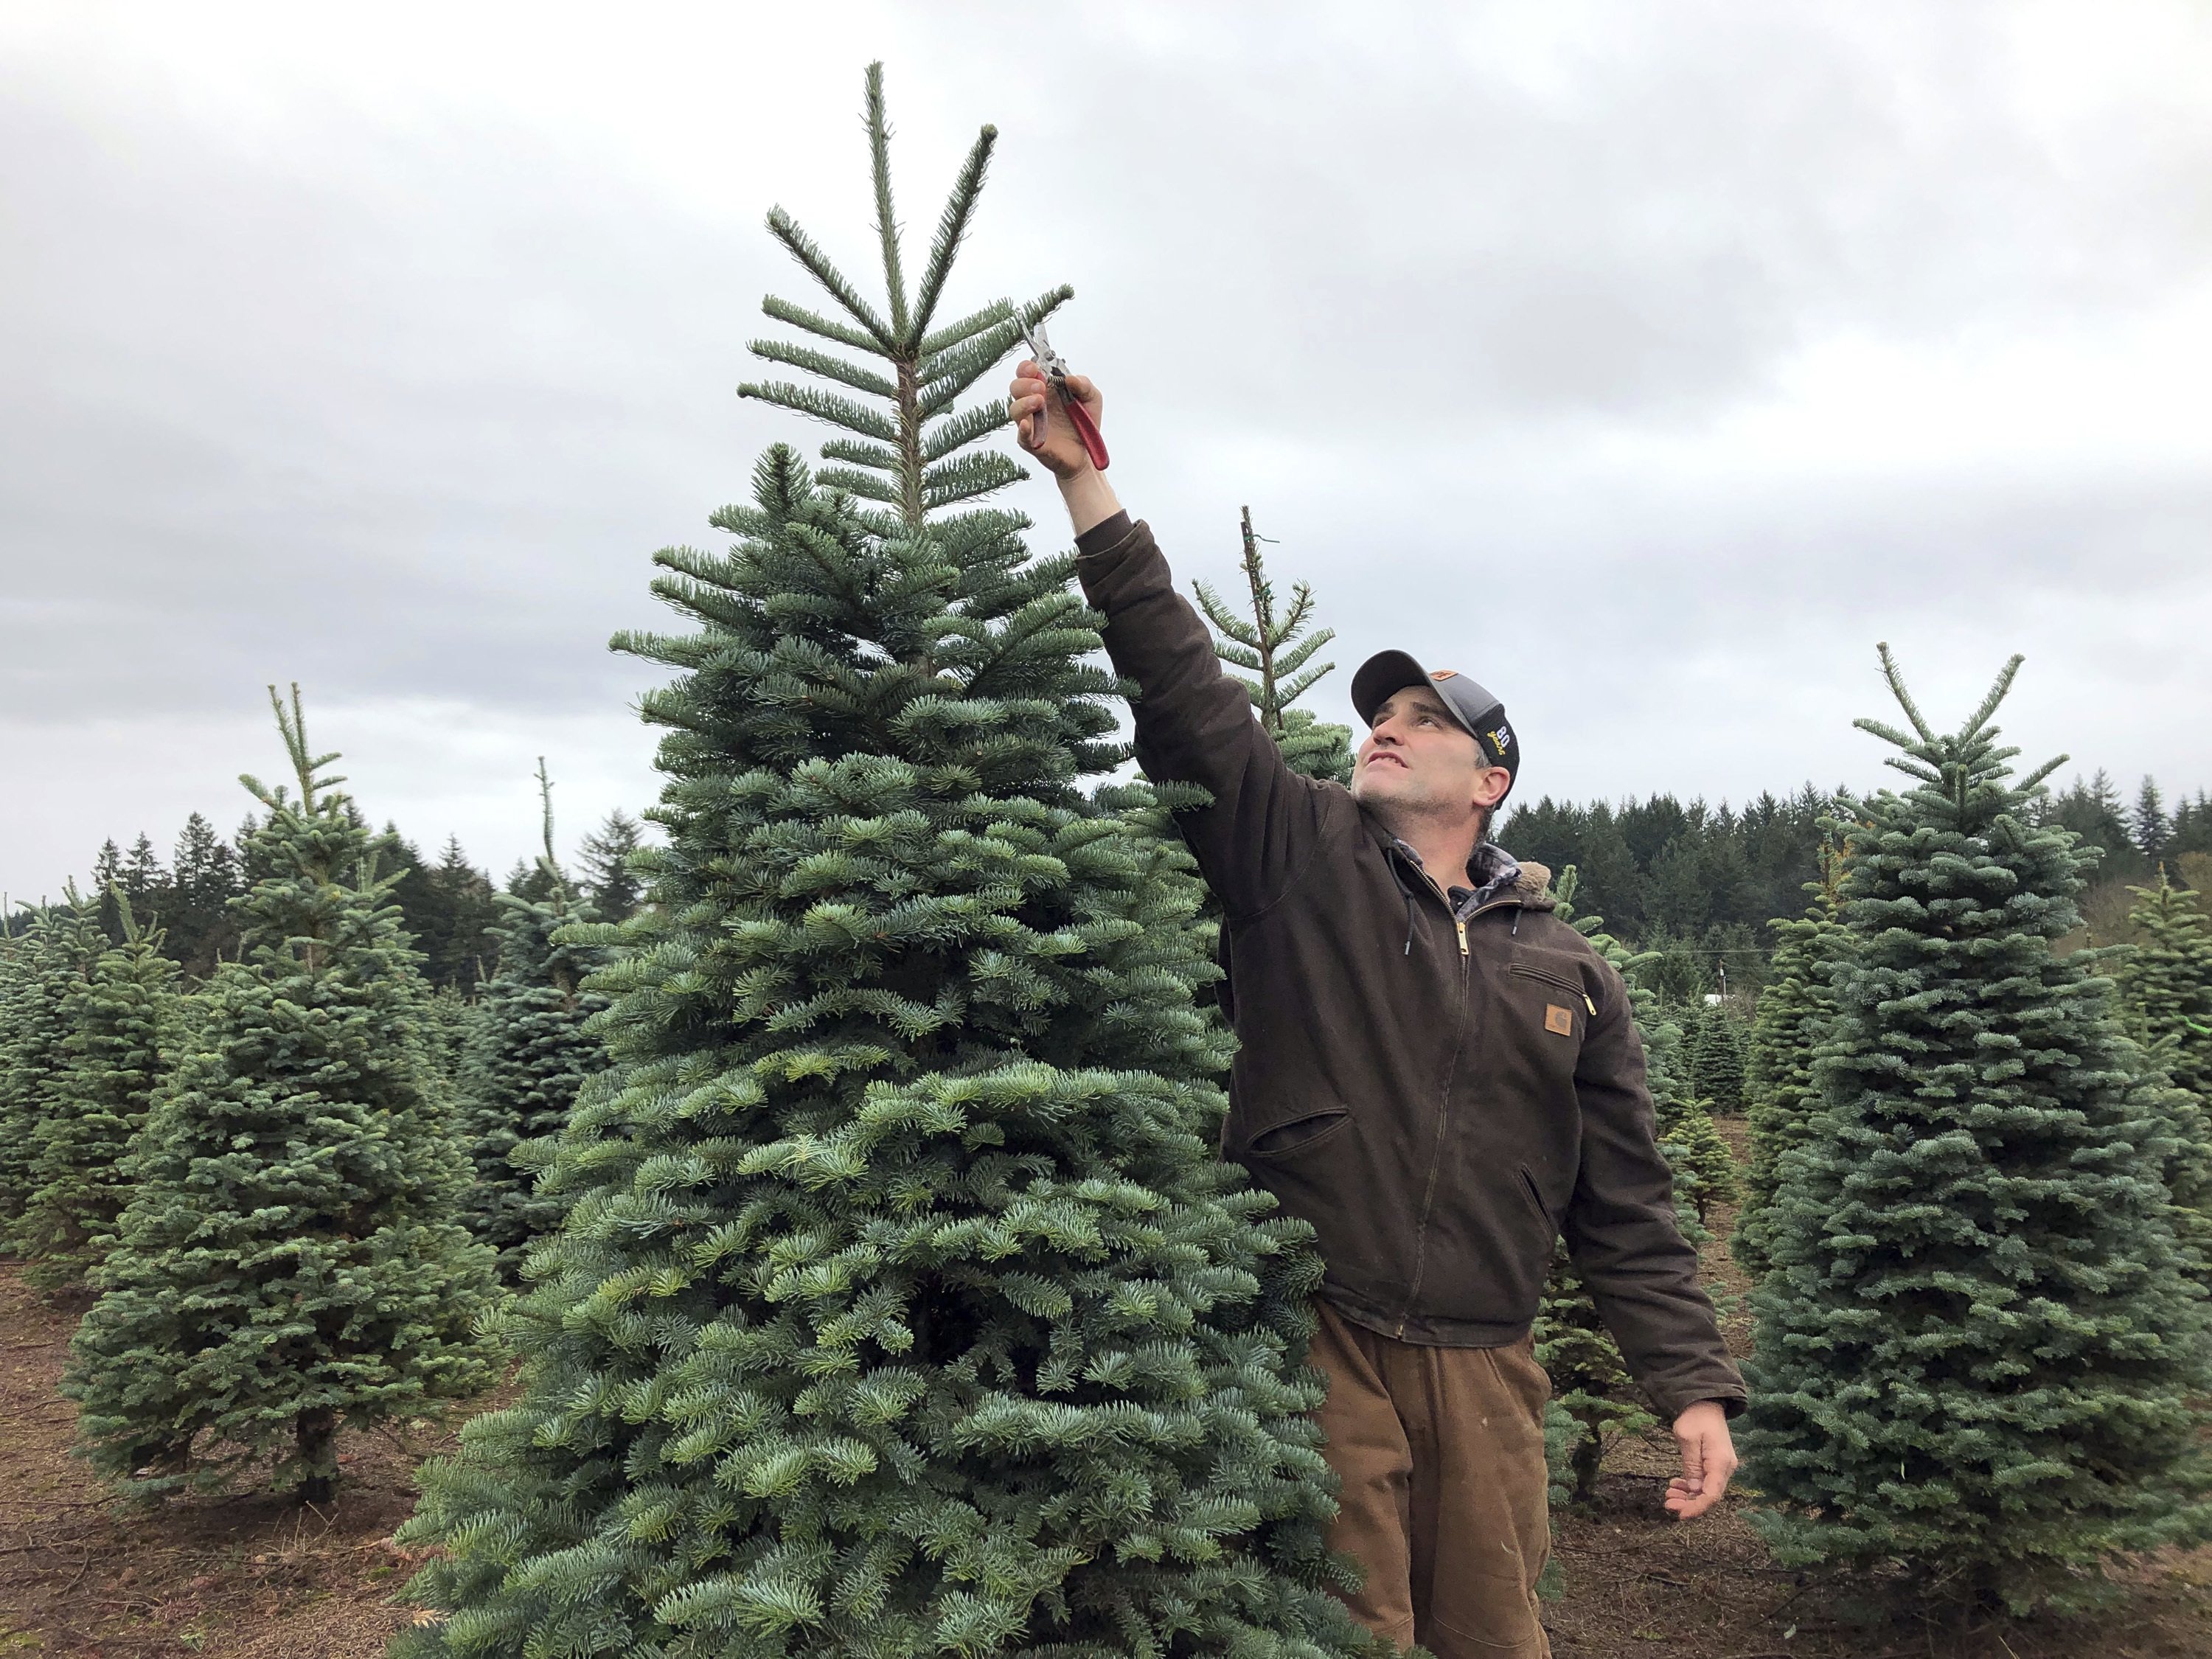 Casey Grogan, owner of Silver Bells Tree Farm and president of the Pacific Northwest Christmas Tree Association, trims a noble fir at his 400-acre Christmas tree farm in Silverton, Ore., U.S., Nov. 2018.  (AP Photo)